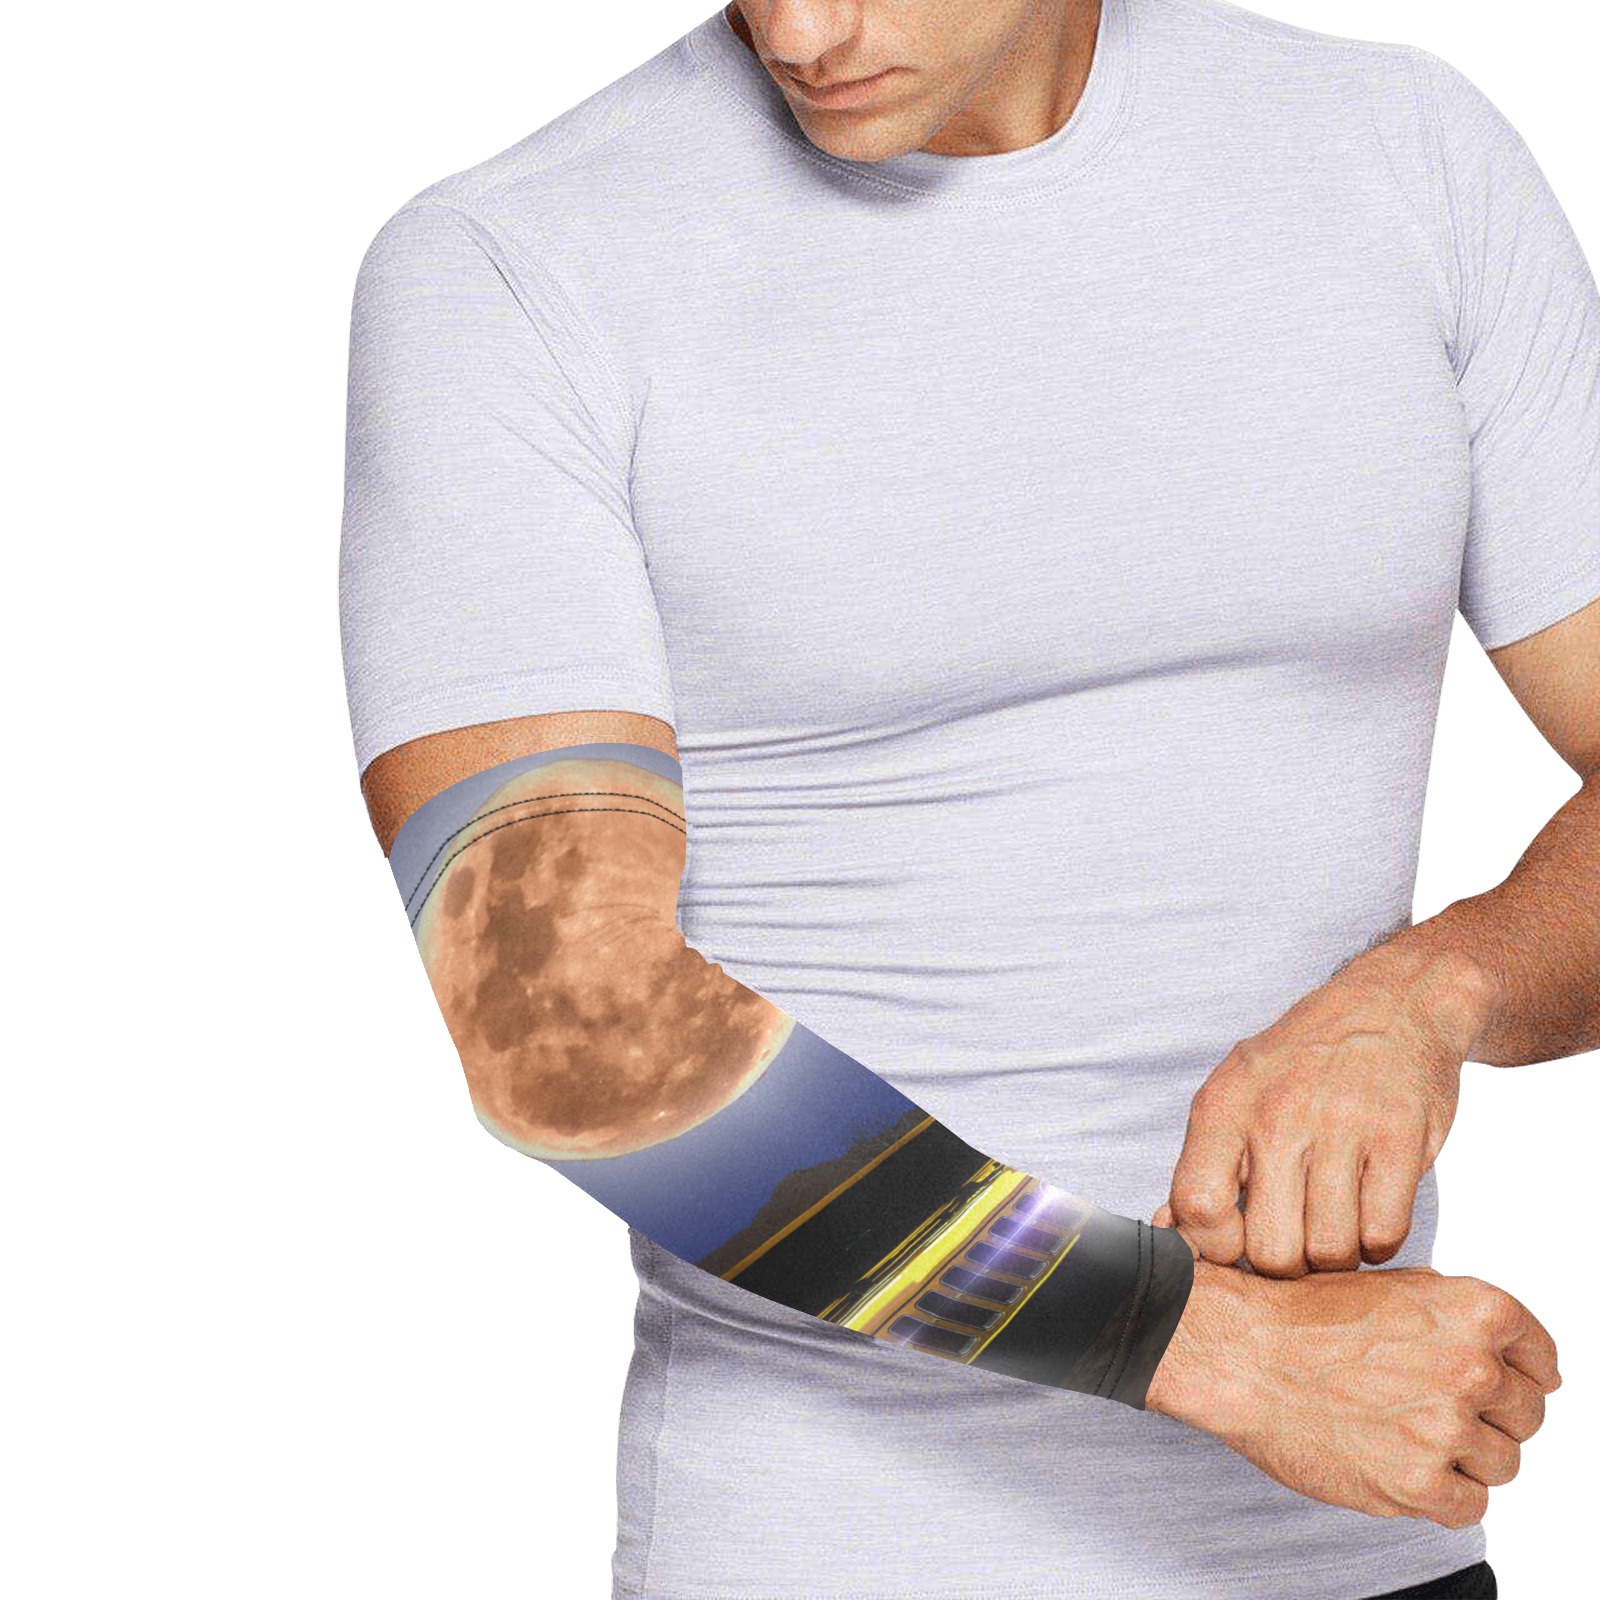 arm sleeve 2pk Arm Sleeves (Set of Two)